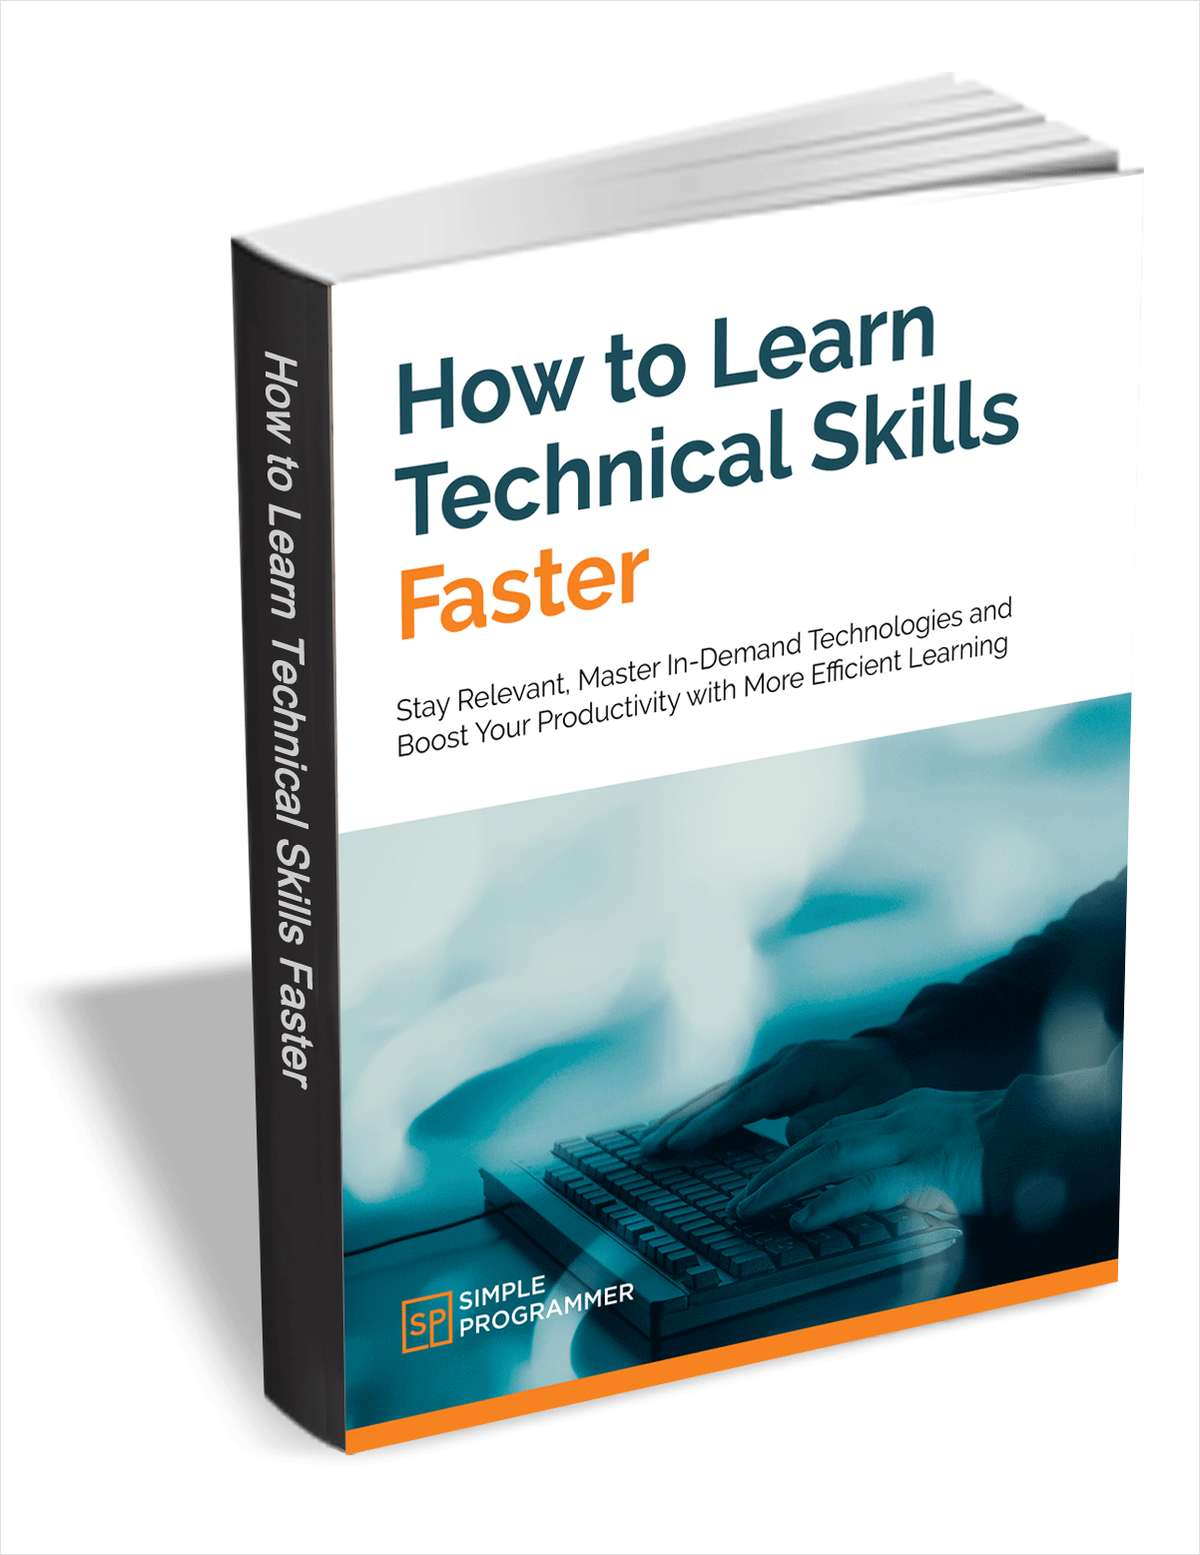 How to Learn Technical Skills Faster